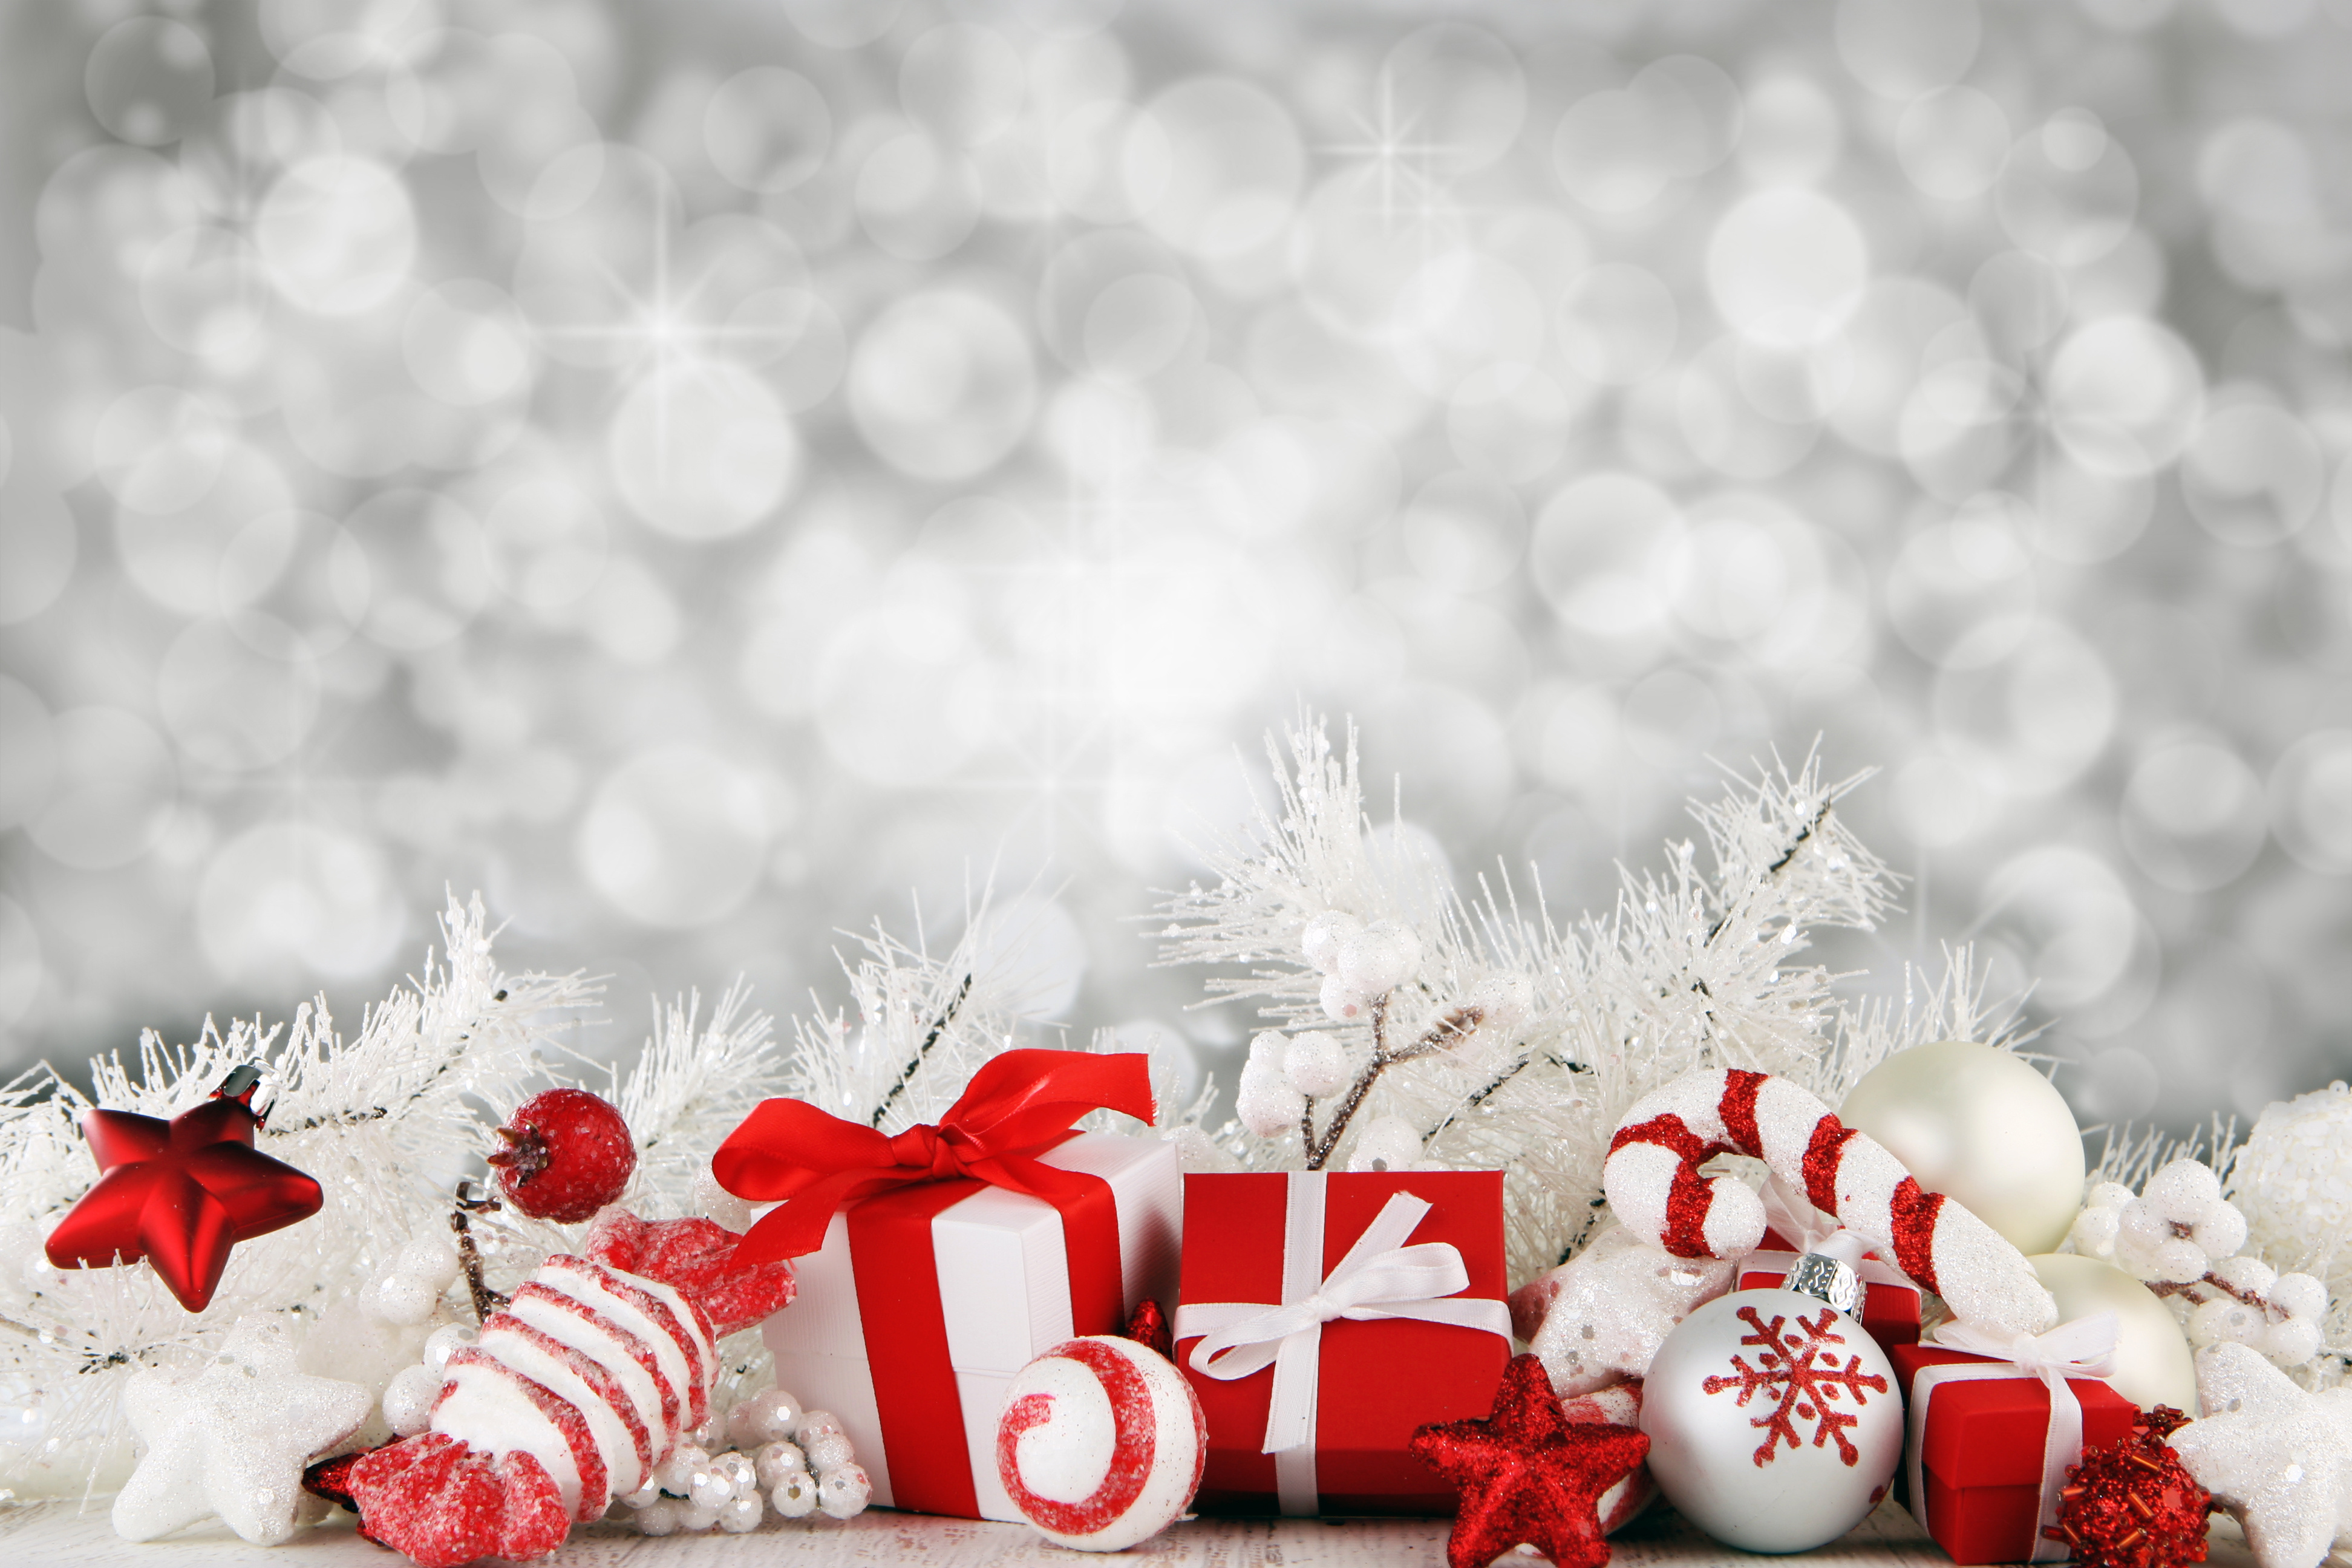 2015 Christmas Backgrounds - Wallpapers, Pics, Pictures, Images ...